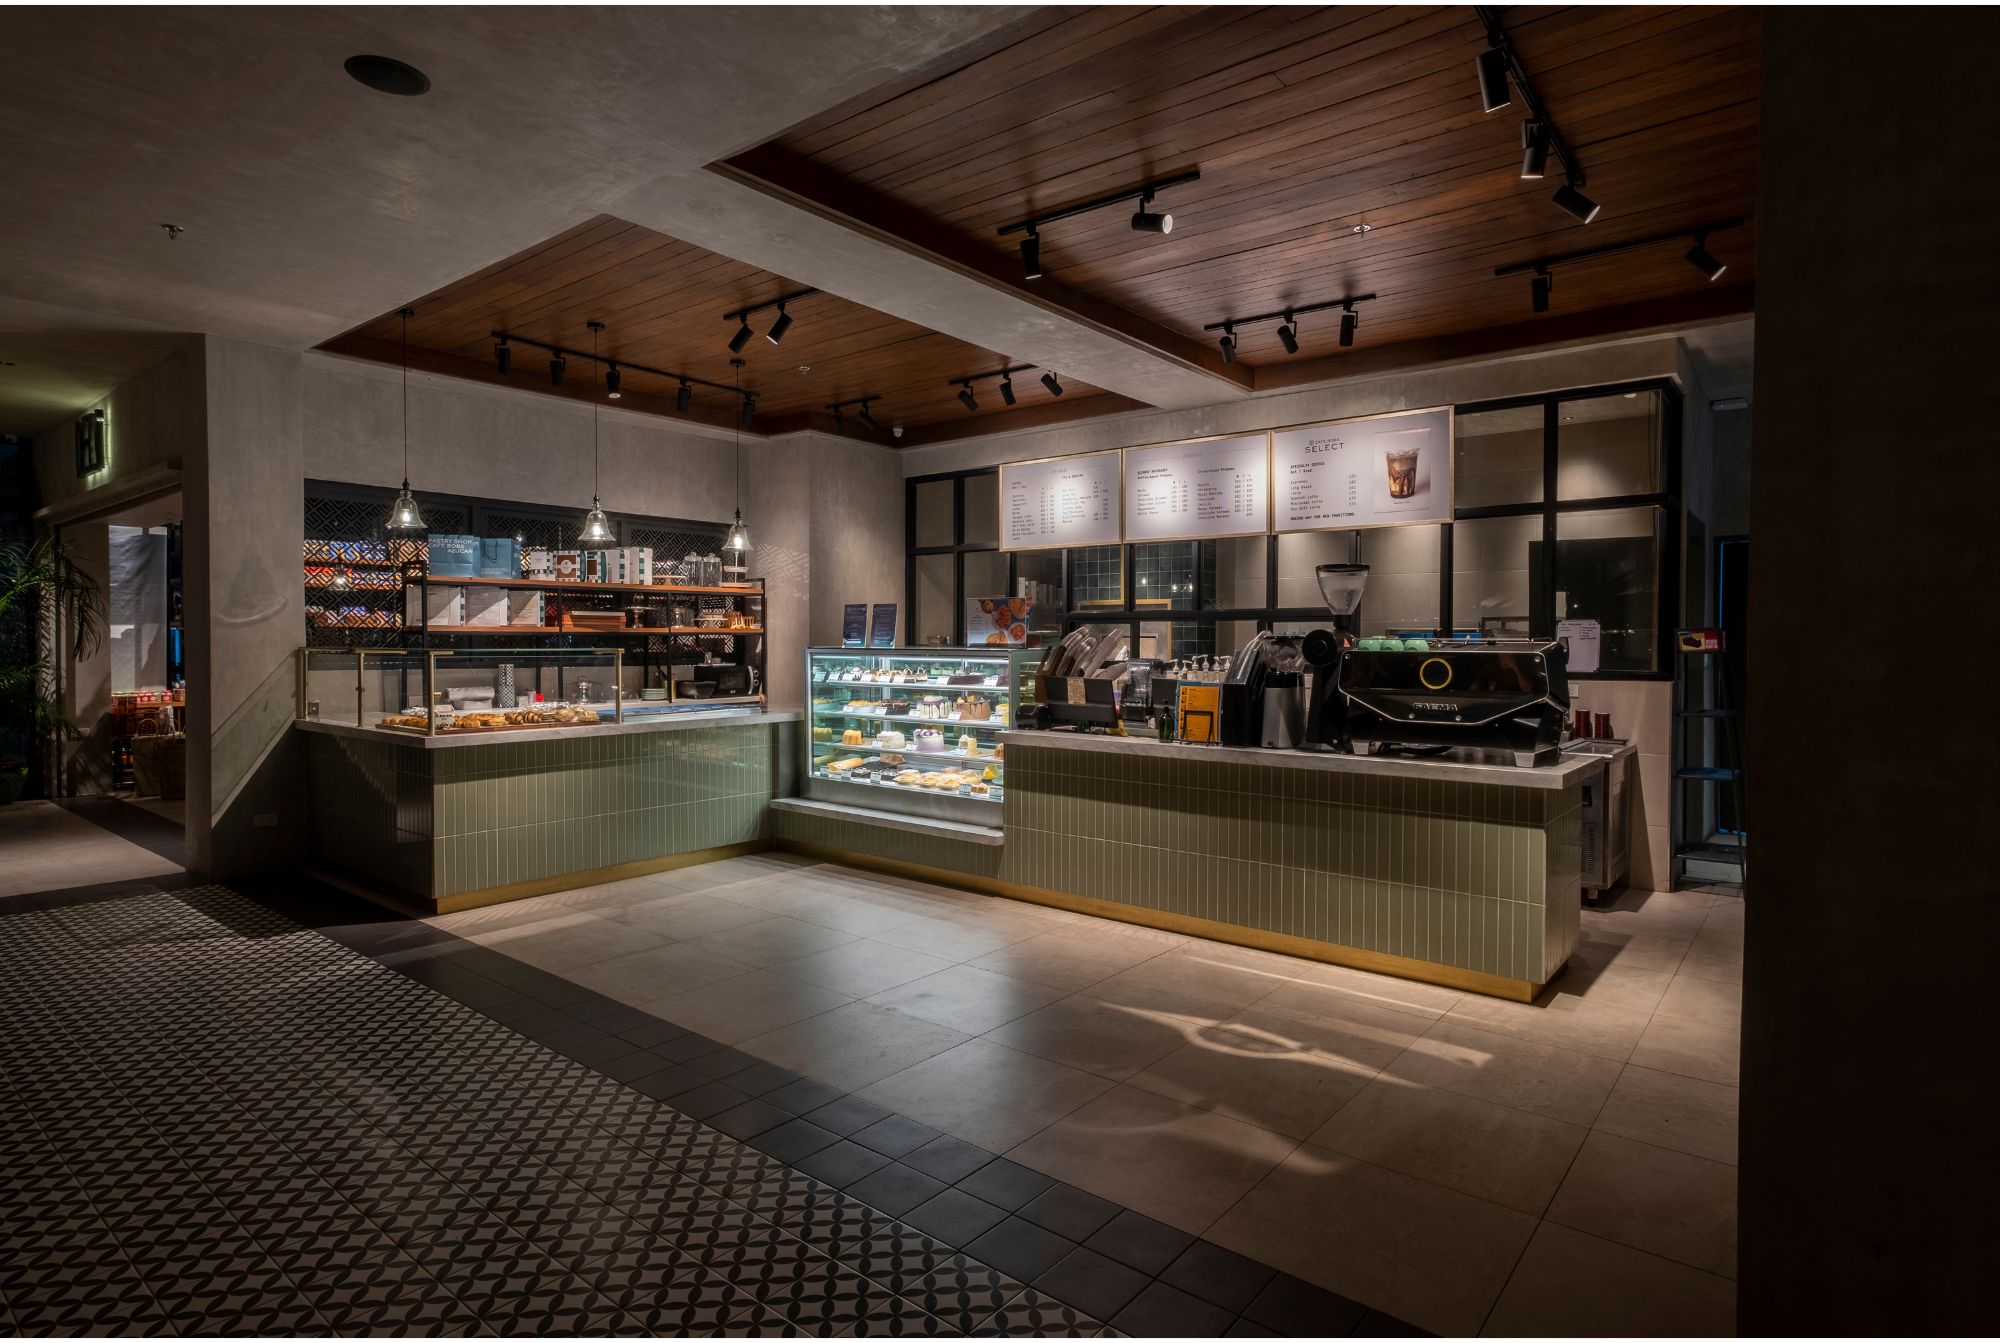 Cafe Bobs coffee shop with ambient lighting and sage green counter.